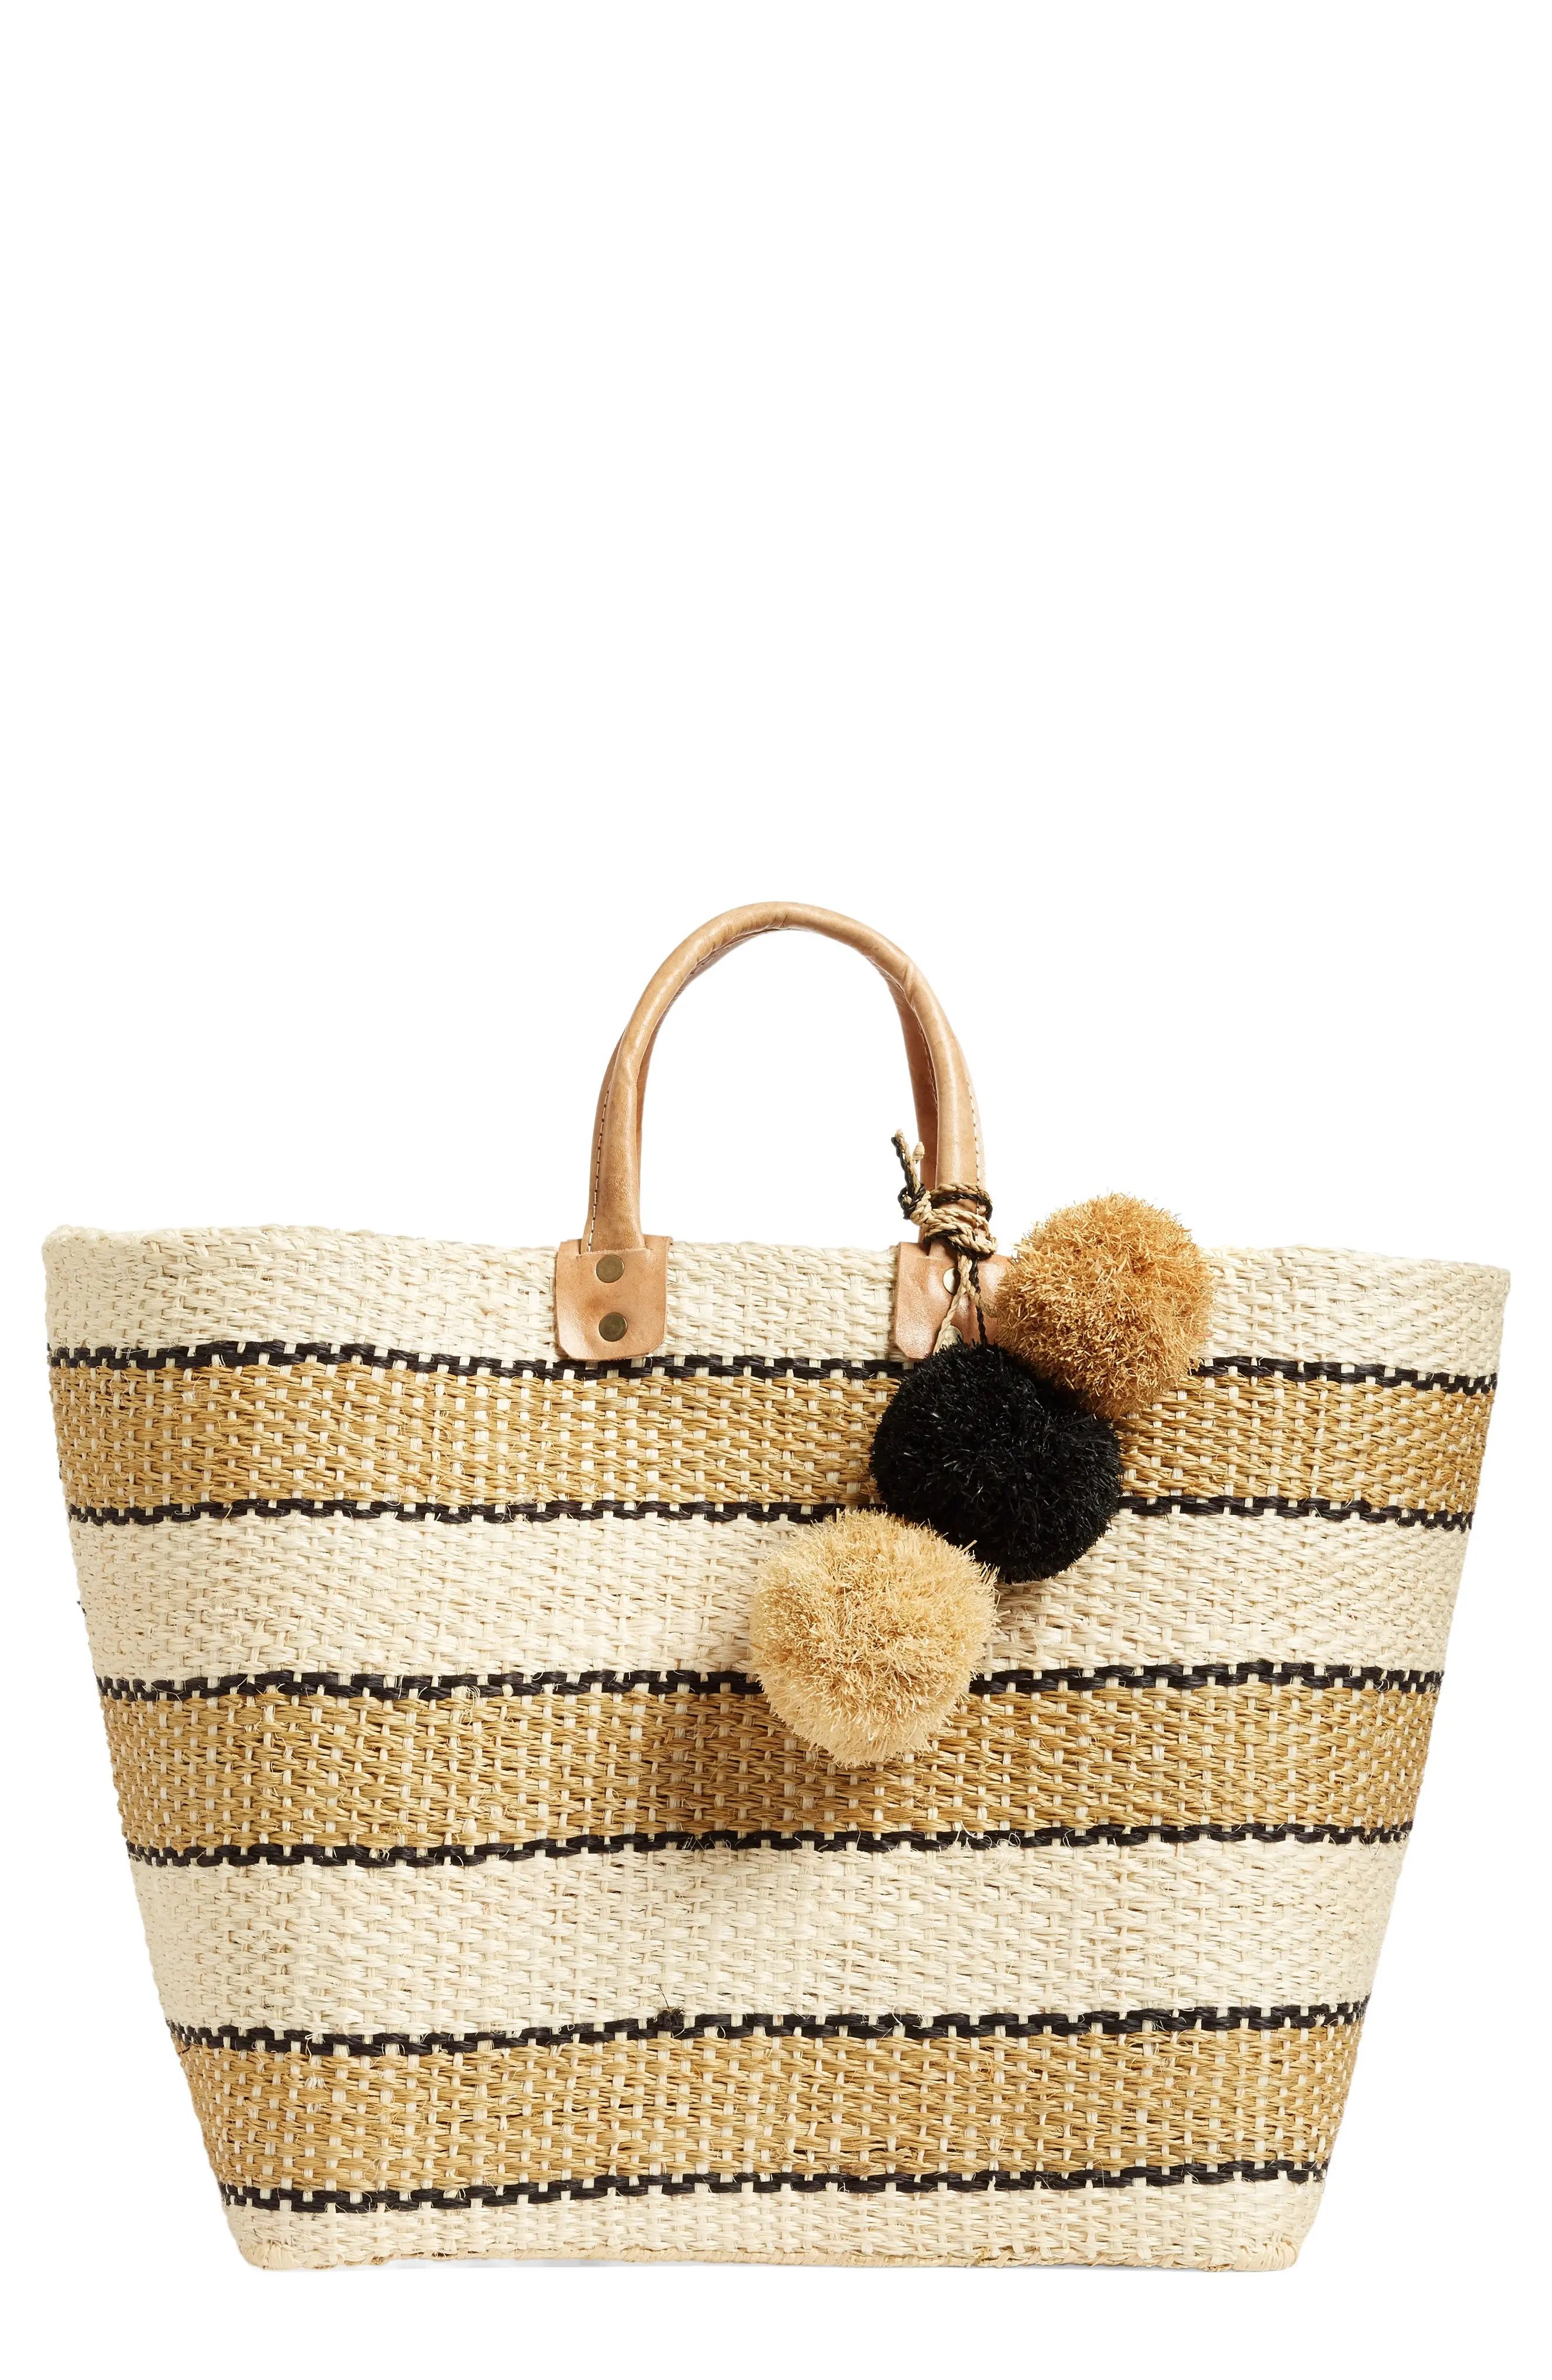 'Capri' Woven Tote with Pom Charms | Nordstrom